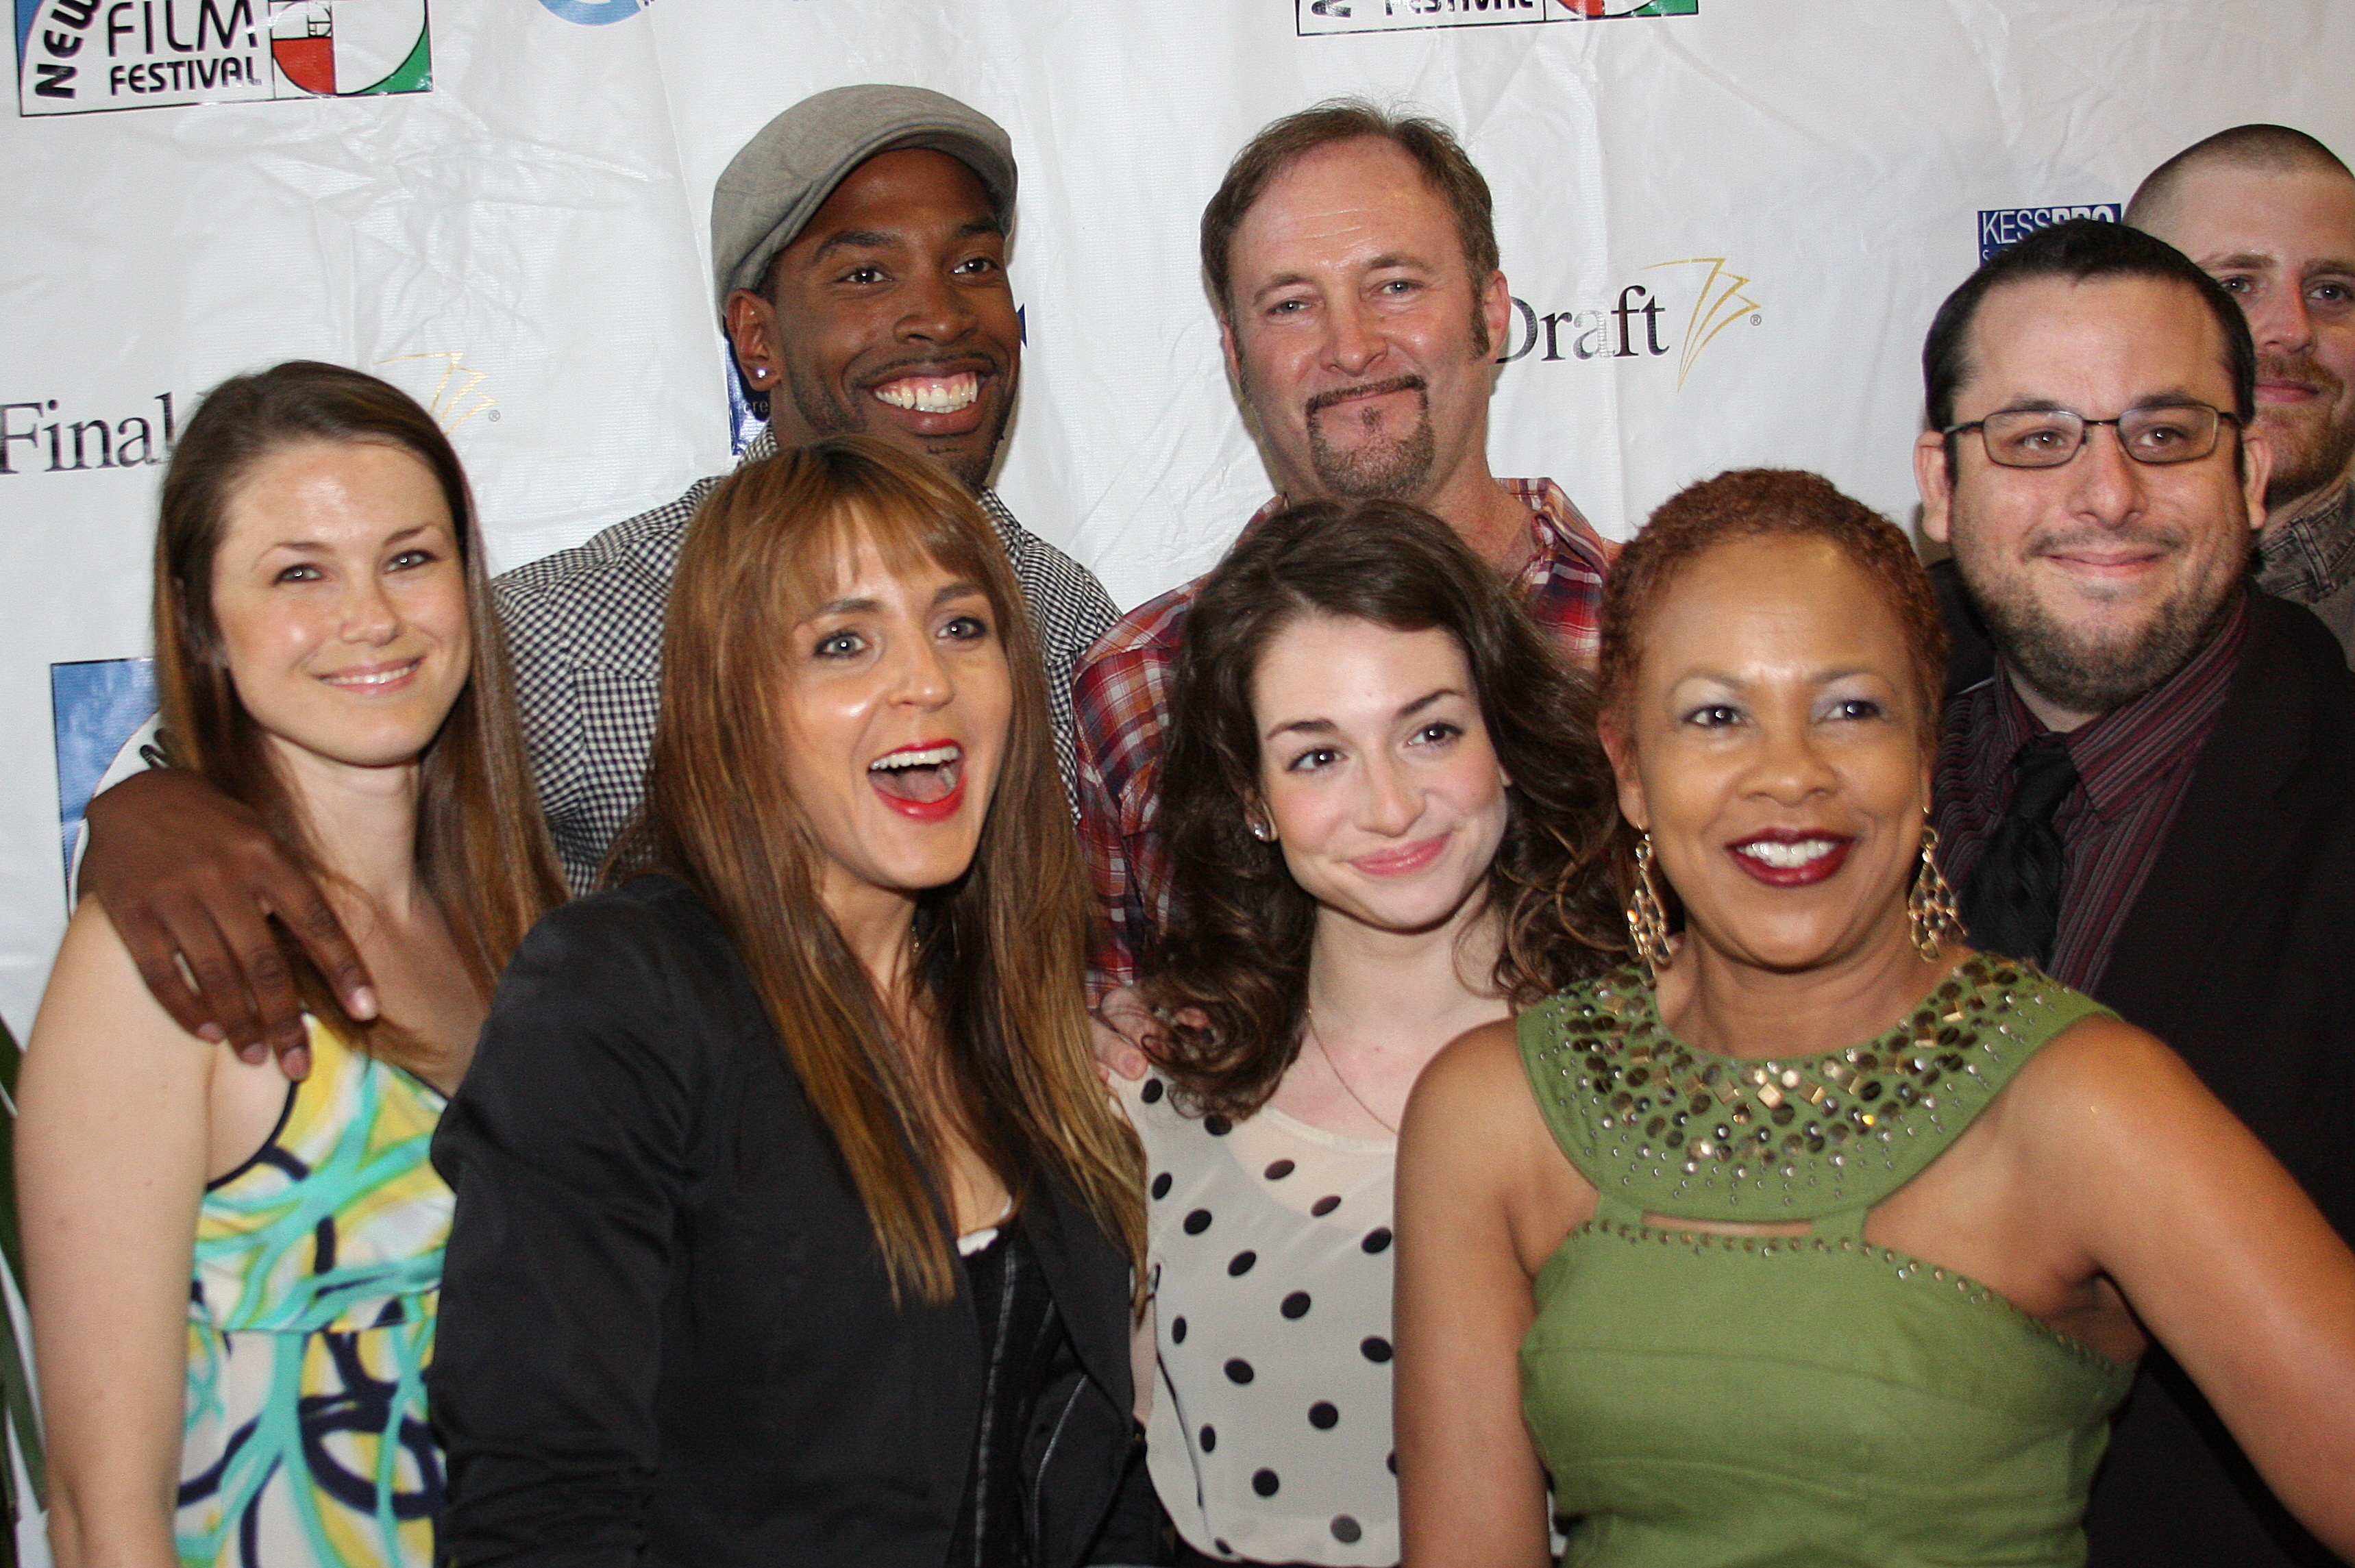 ASYLUM Cast/Crew NMFF - May 20, 2011 On The Red Carpet